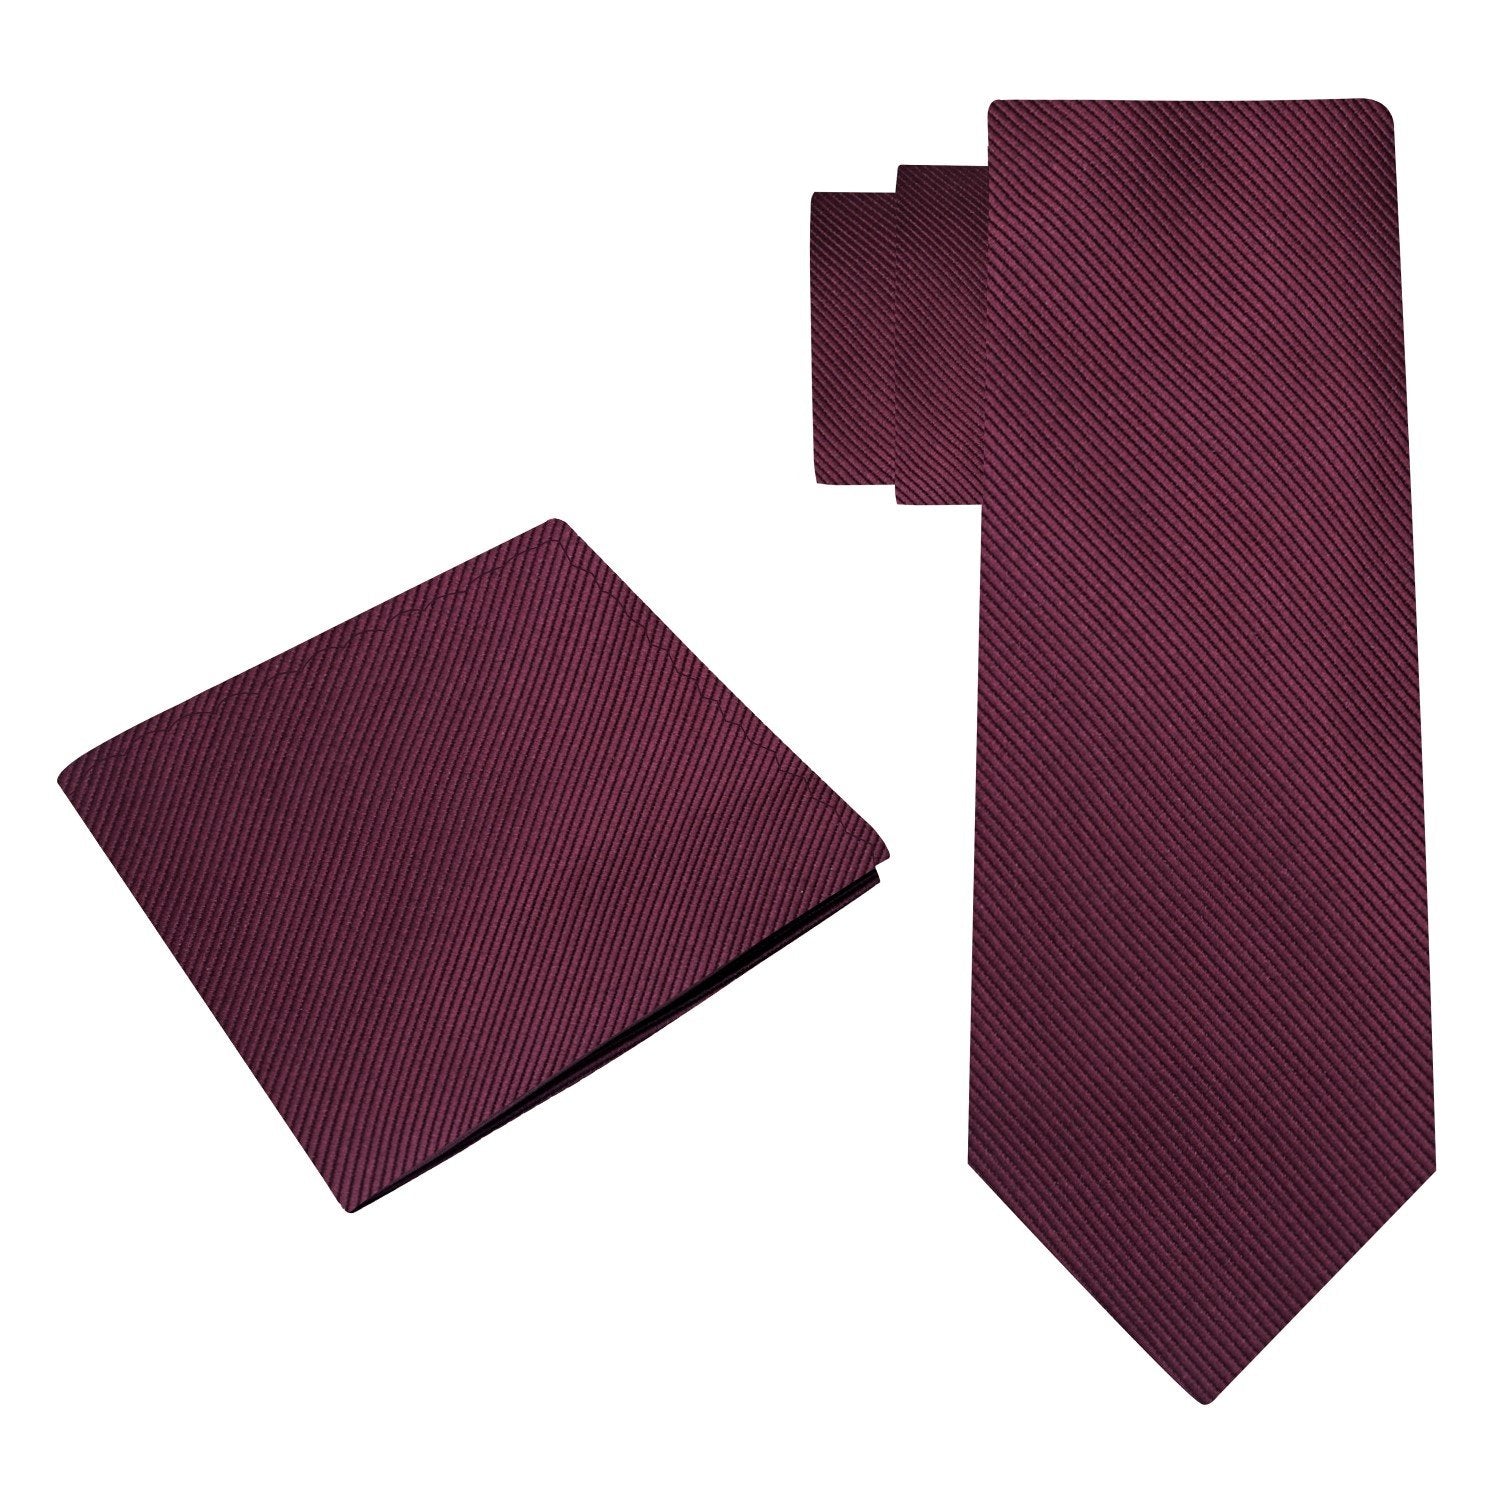 Alt View: Solid Malbec Tie and Pocket Square